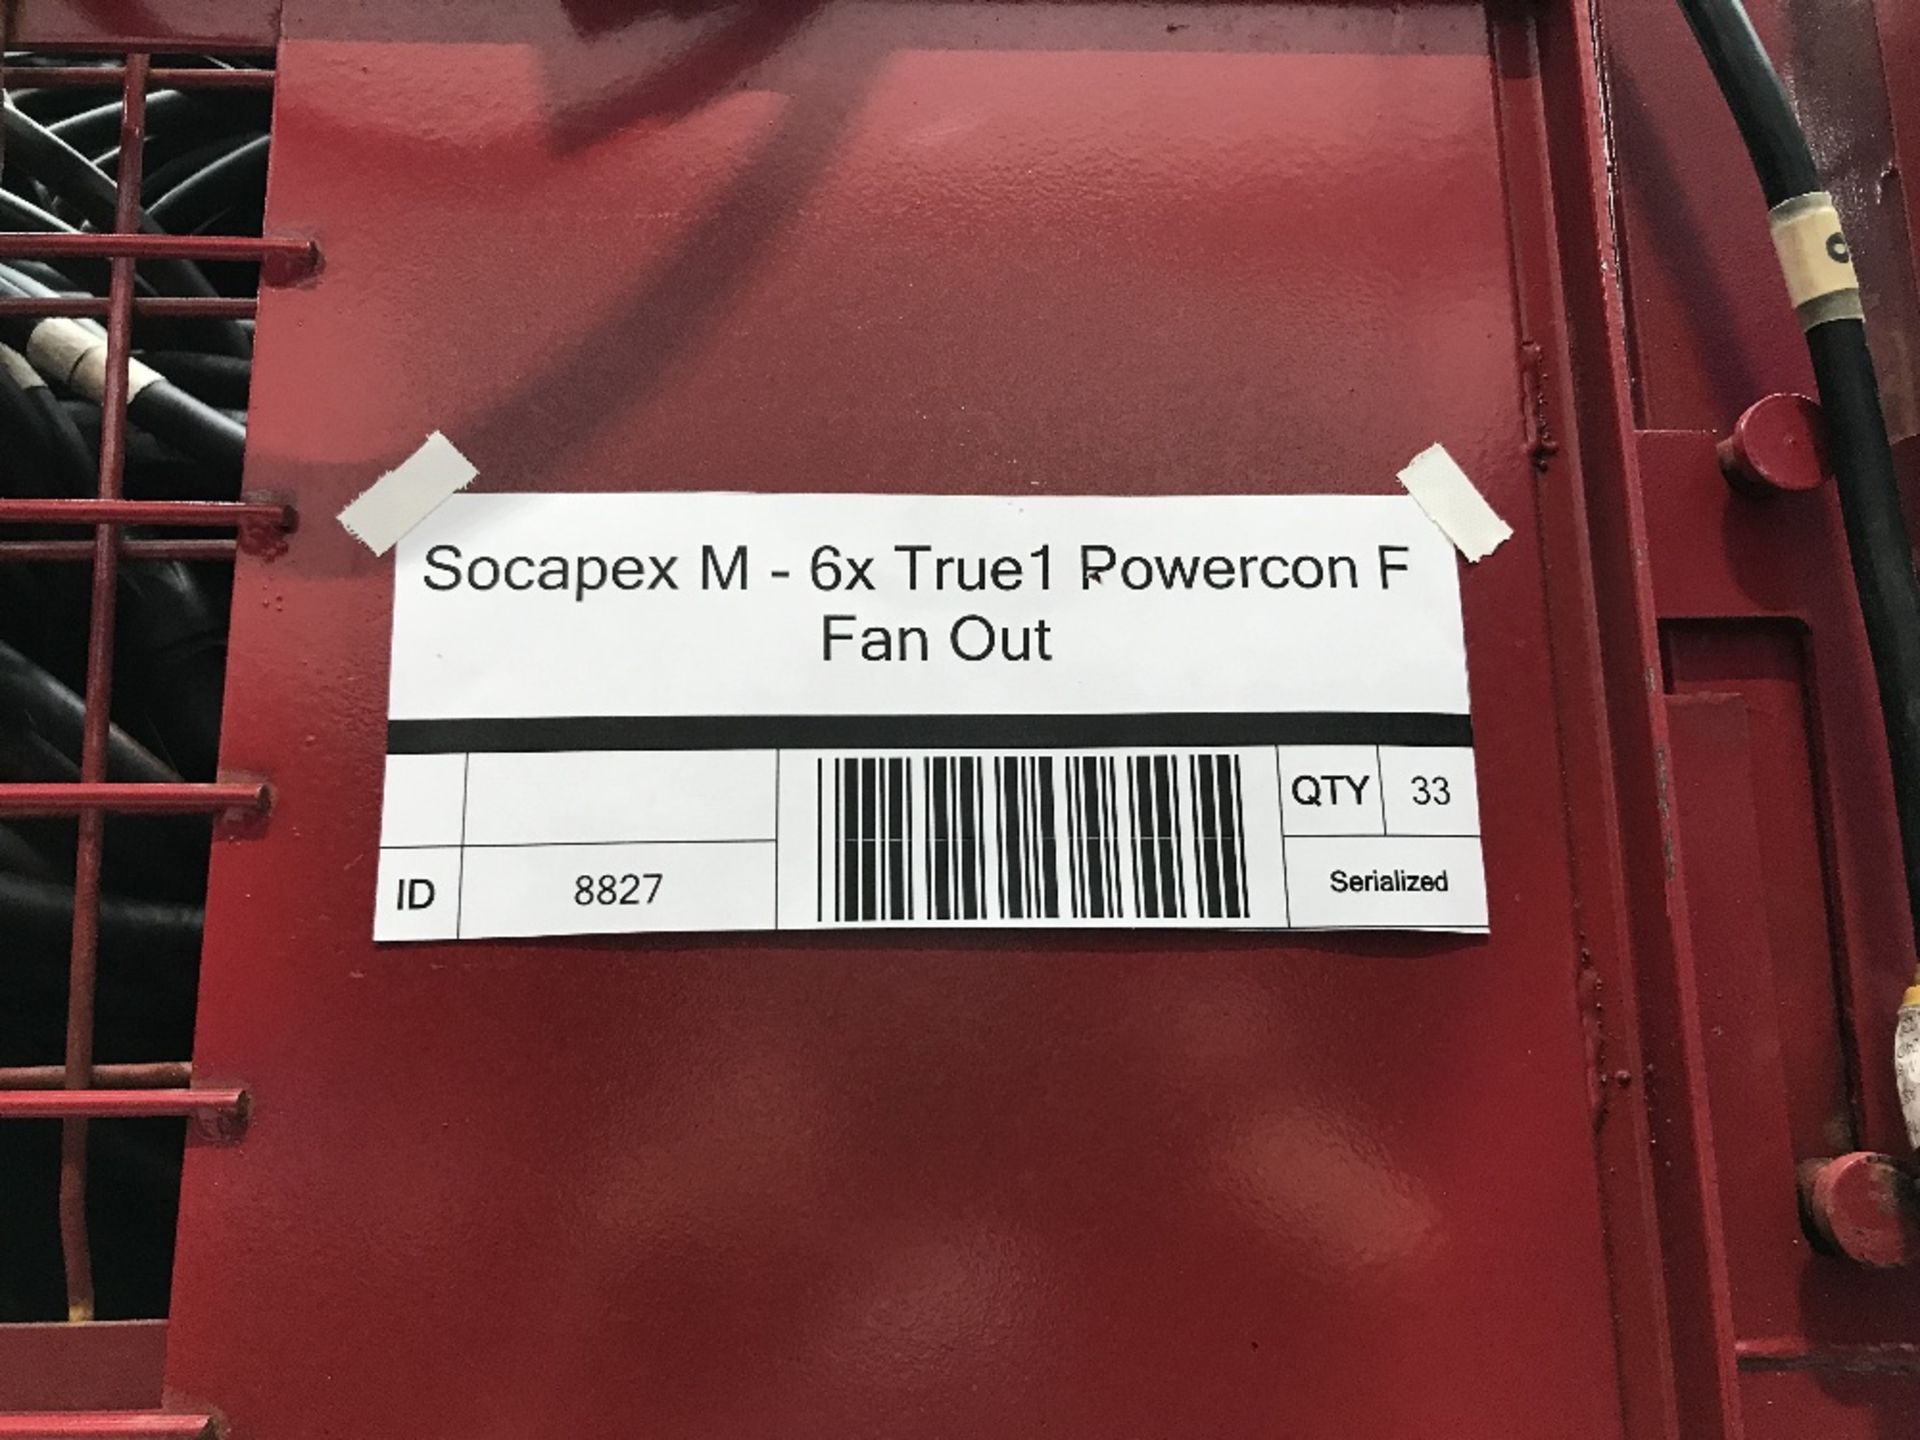 Large Quantity of Socapex M-6X True1 Powercon Fan Out with Steel Fabricated Stillage - Image 2 of 2